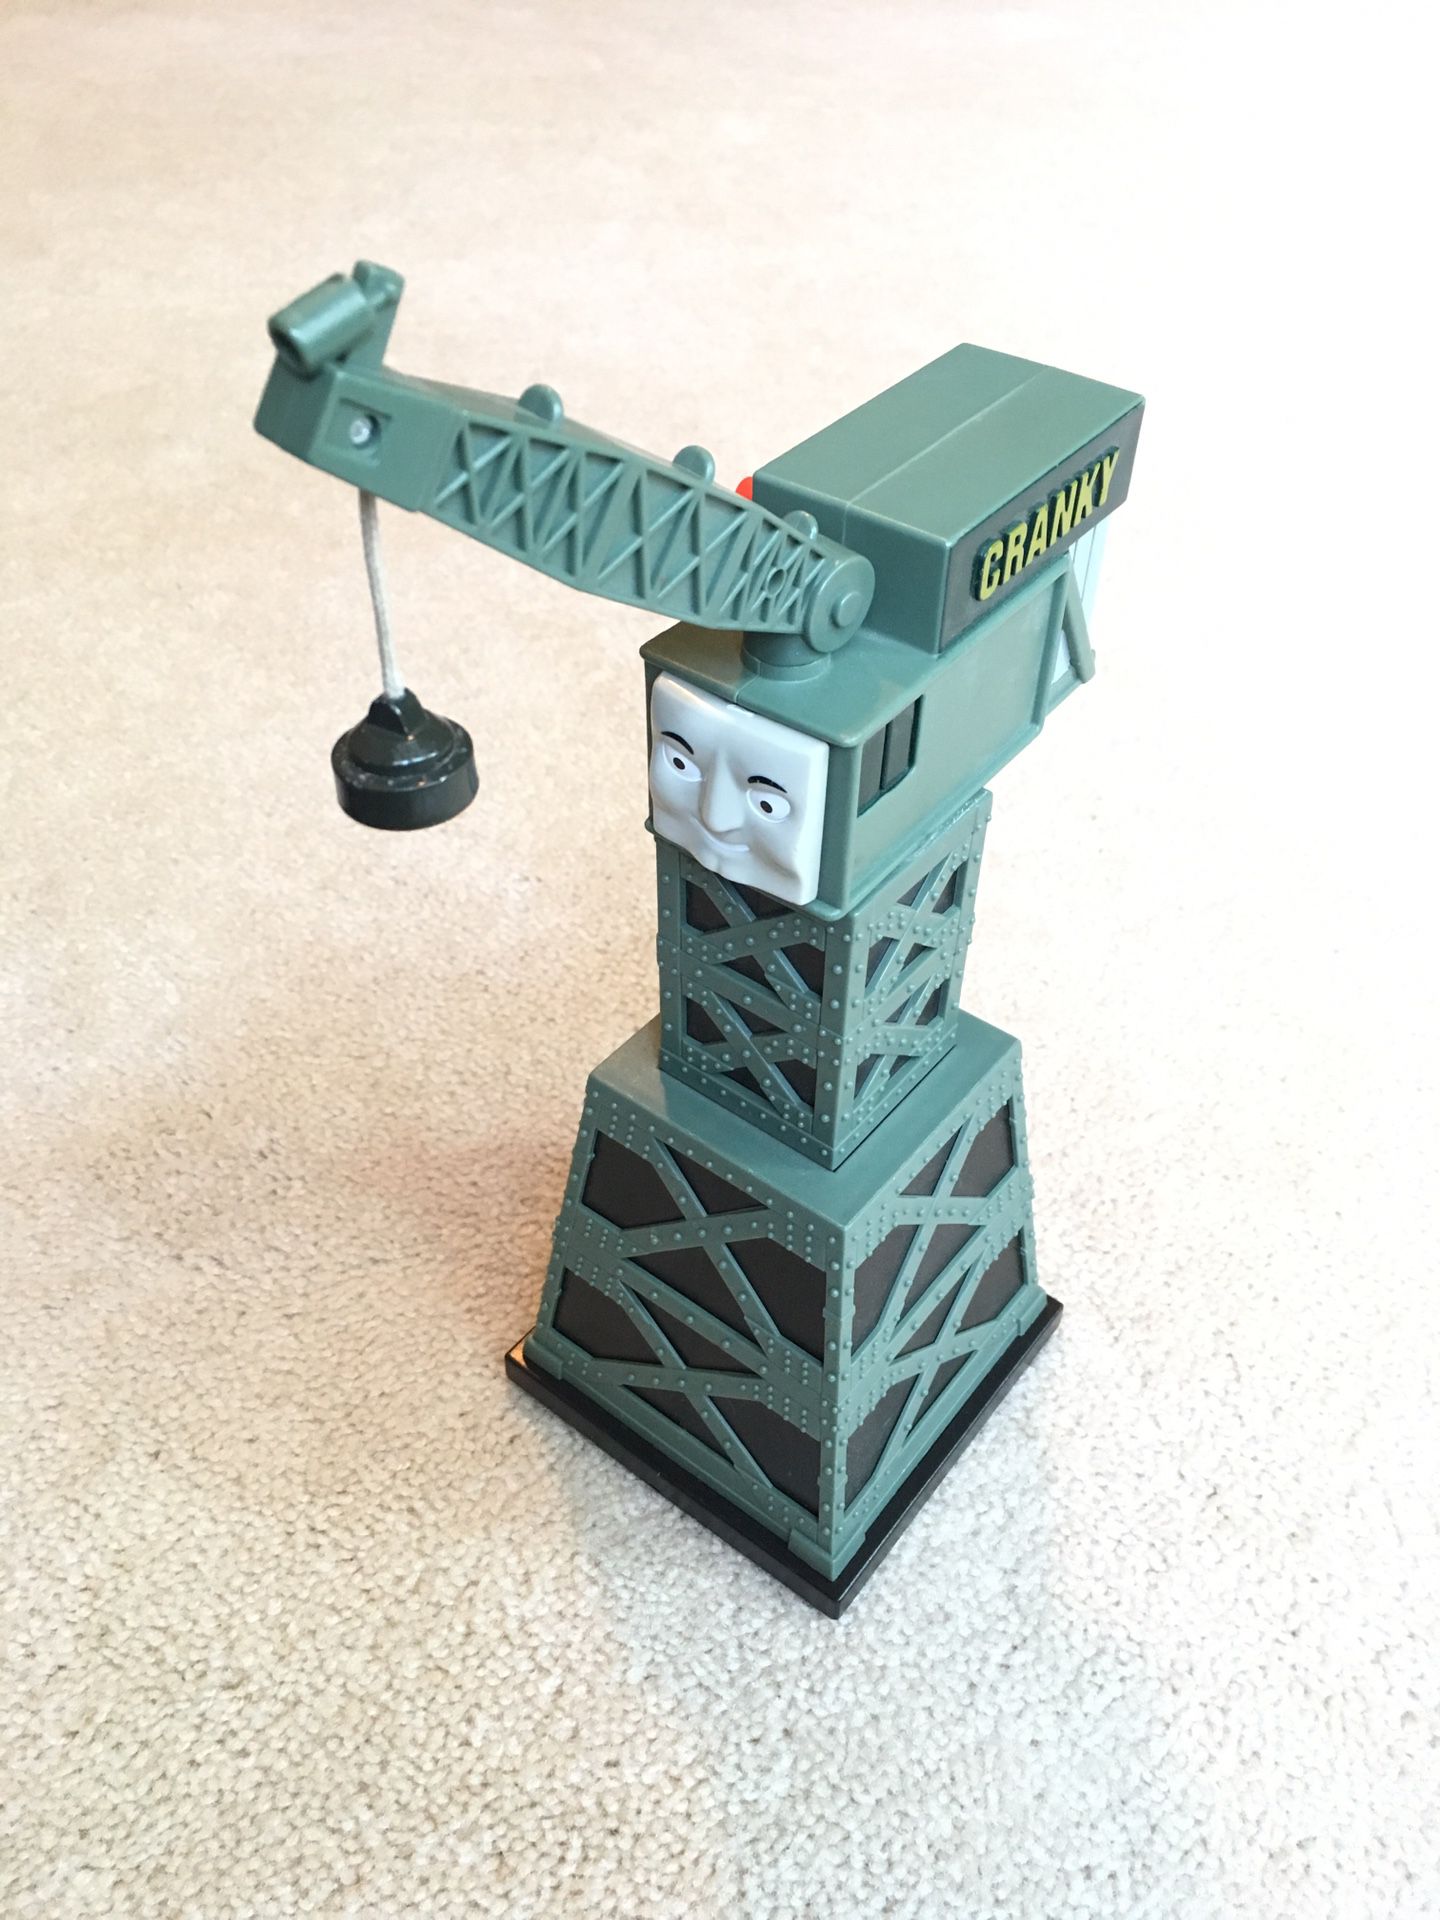 Thomas and Friends Cranky the Crane with Magnet Rotates Lifts